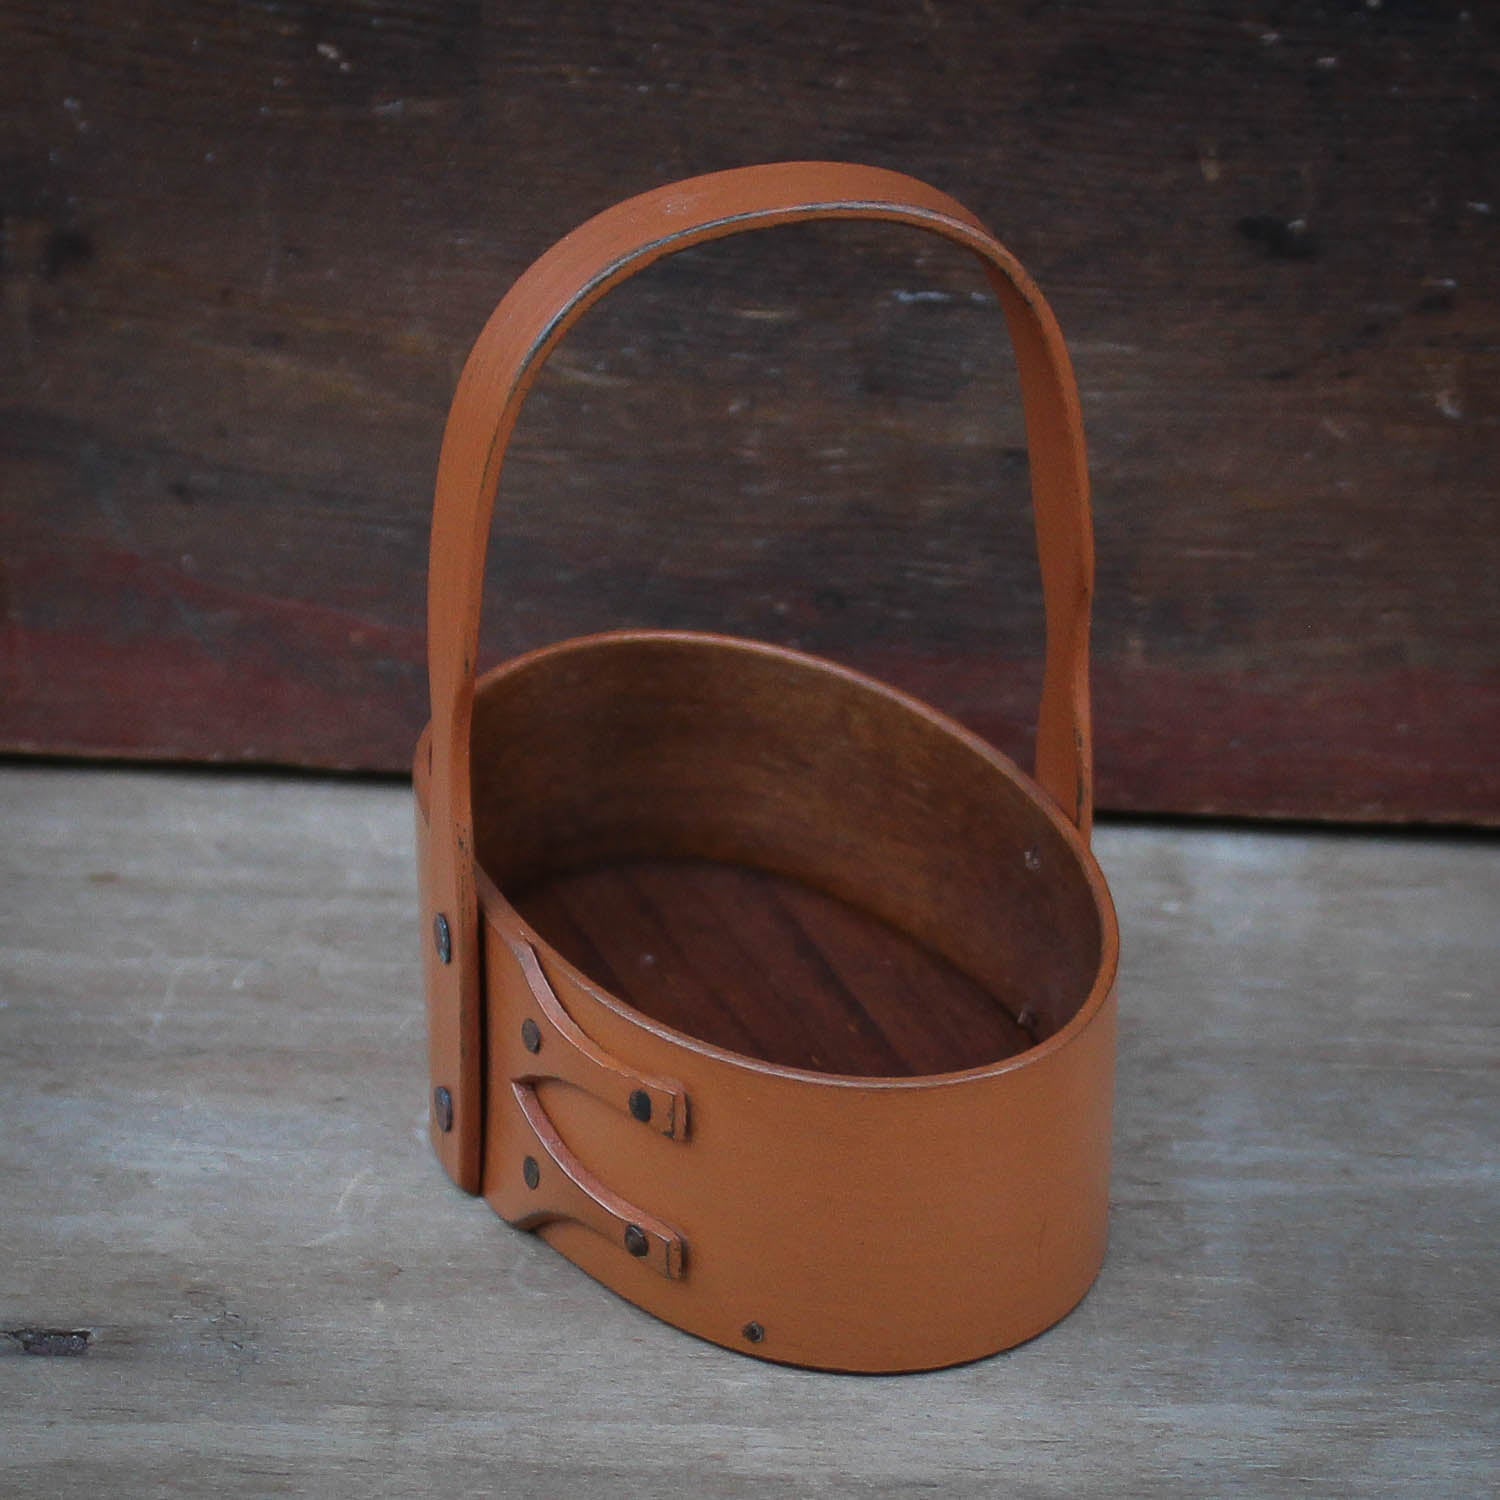 Shaker Carrier, Size #1, LeHays Shaker Boxes, Handcrafted in Maine.  Pumpkin Milk Paint Finish, Side View